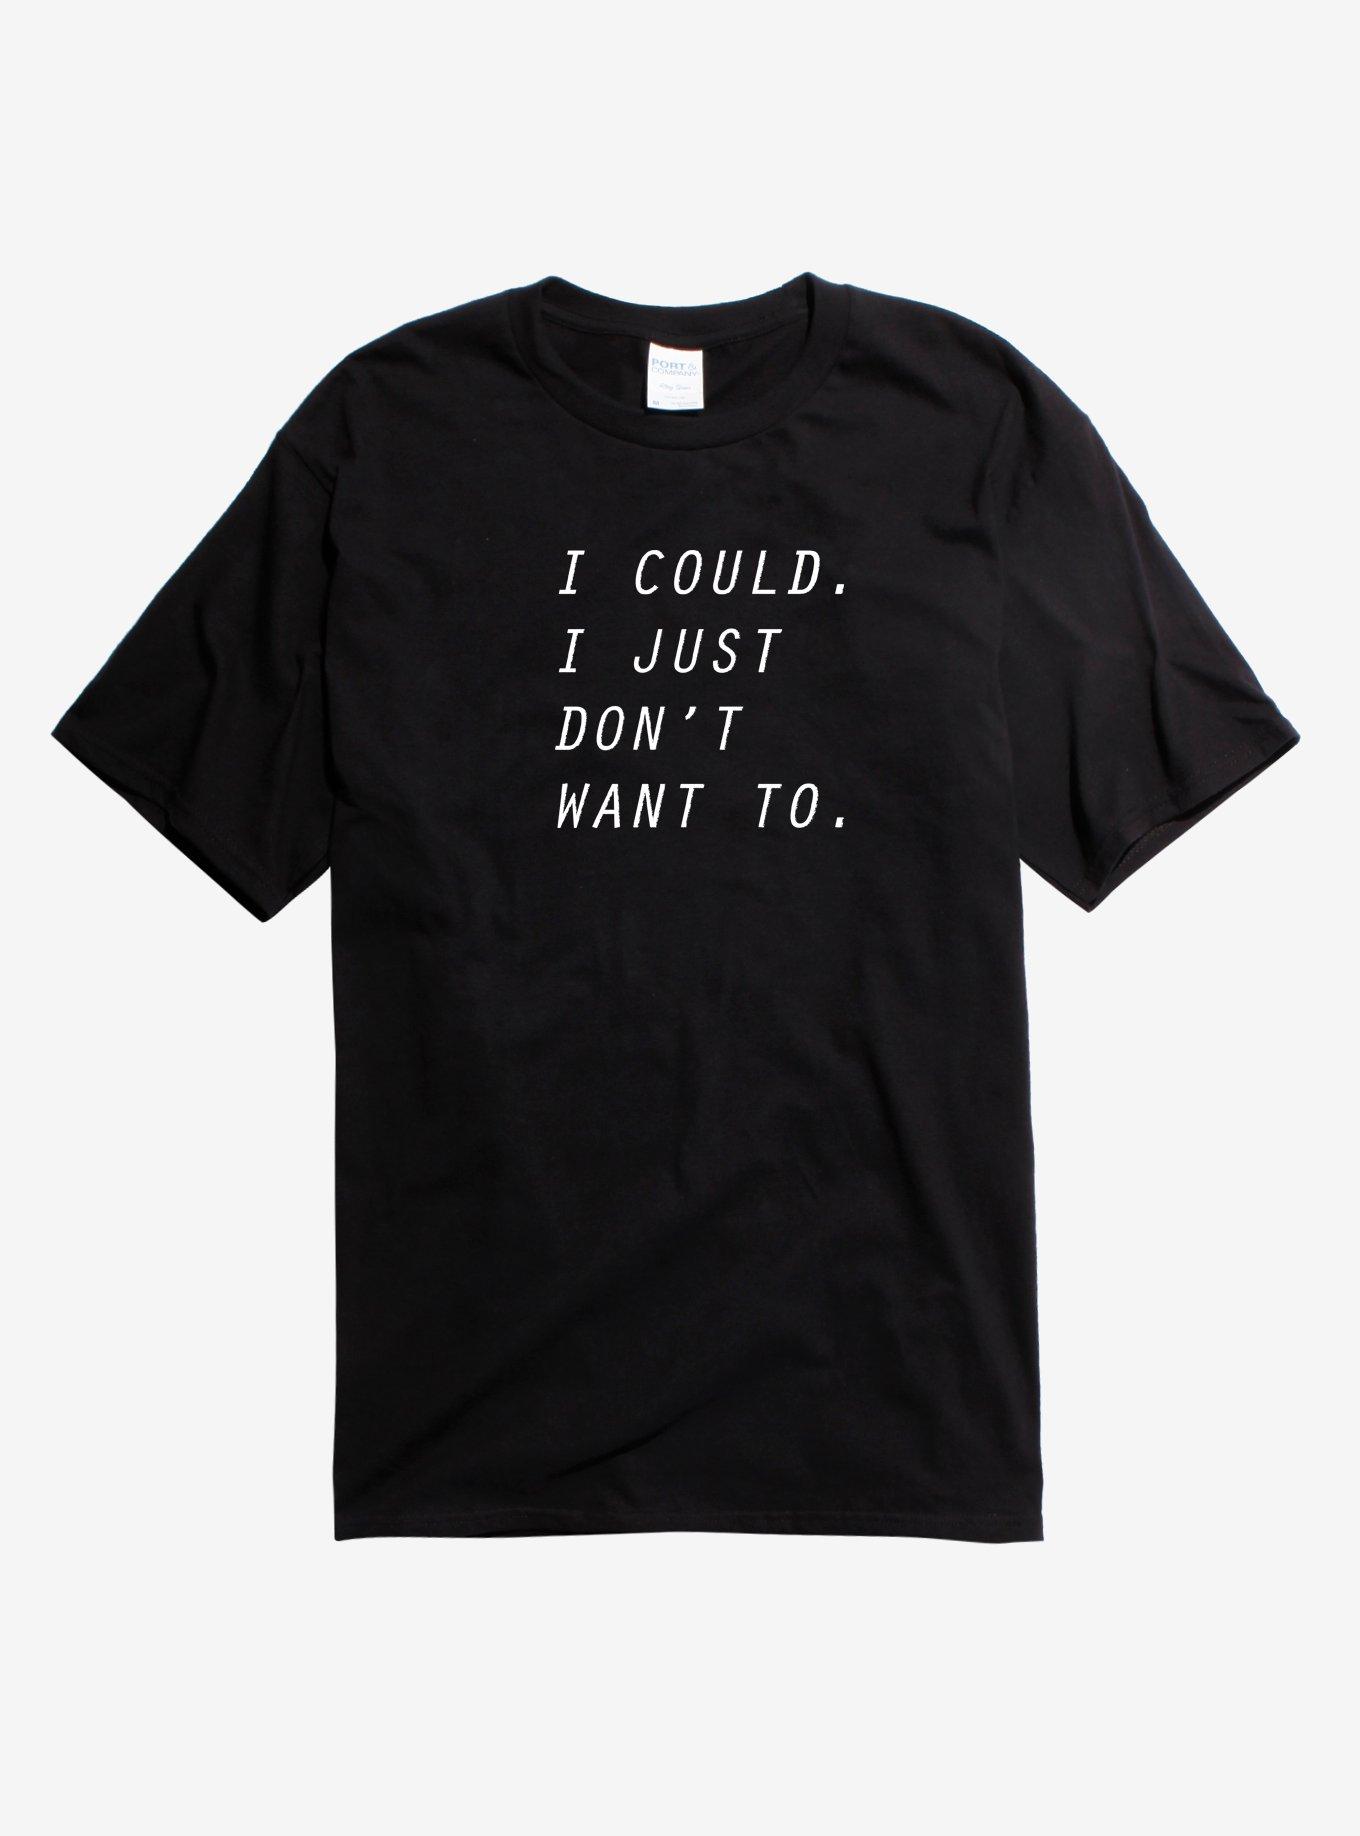 I Just Don't Want To T-Shirt, BLACK, hi-res